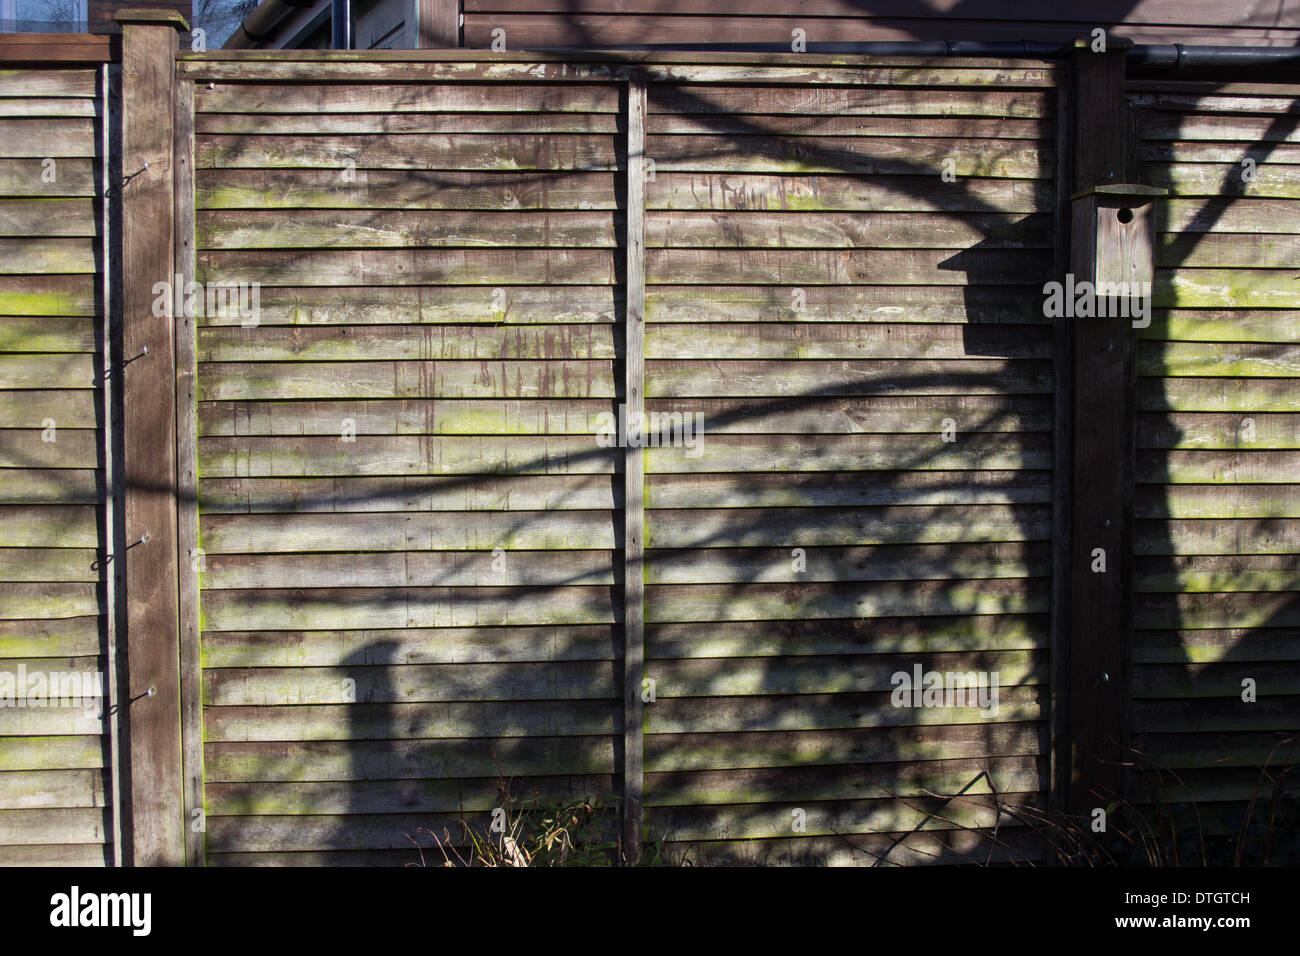 Wooden panel garden fence with tree shadow and birdbox Stock Photo